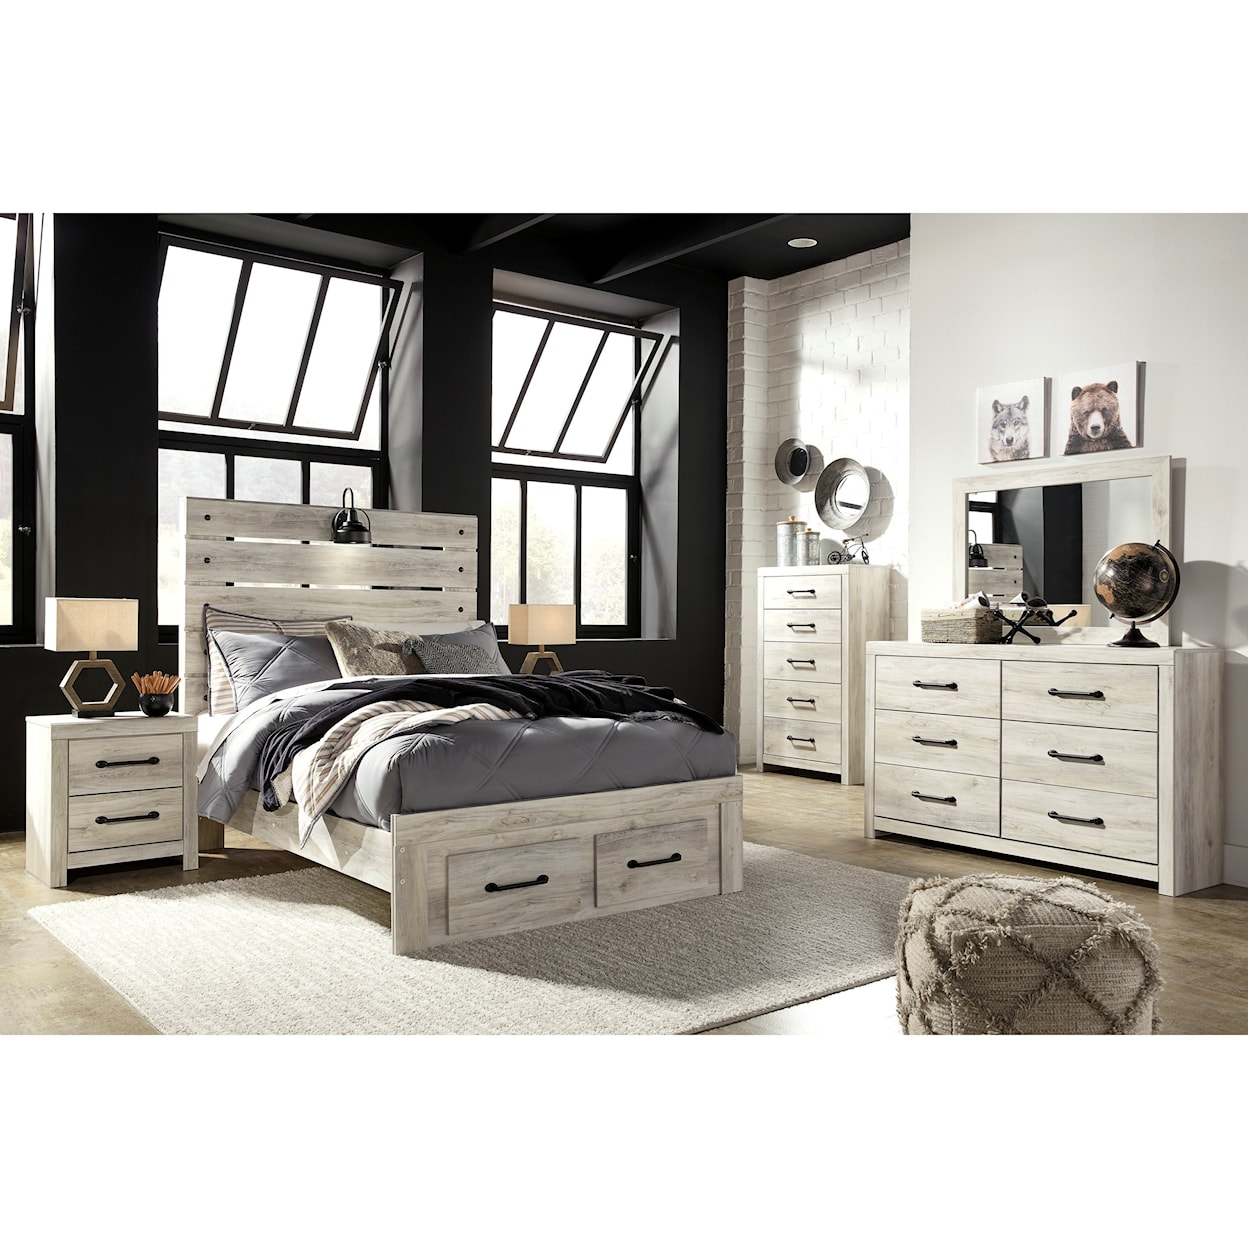 Signature Design by Ashley Furniture Cambeck Full Bedroom Group